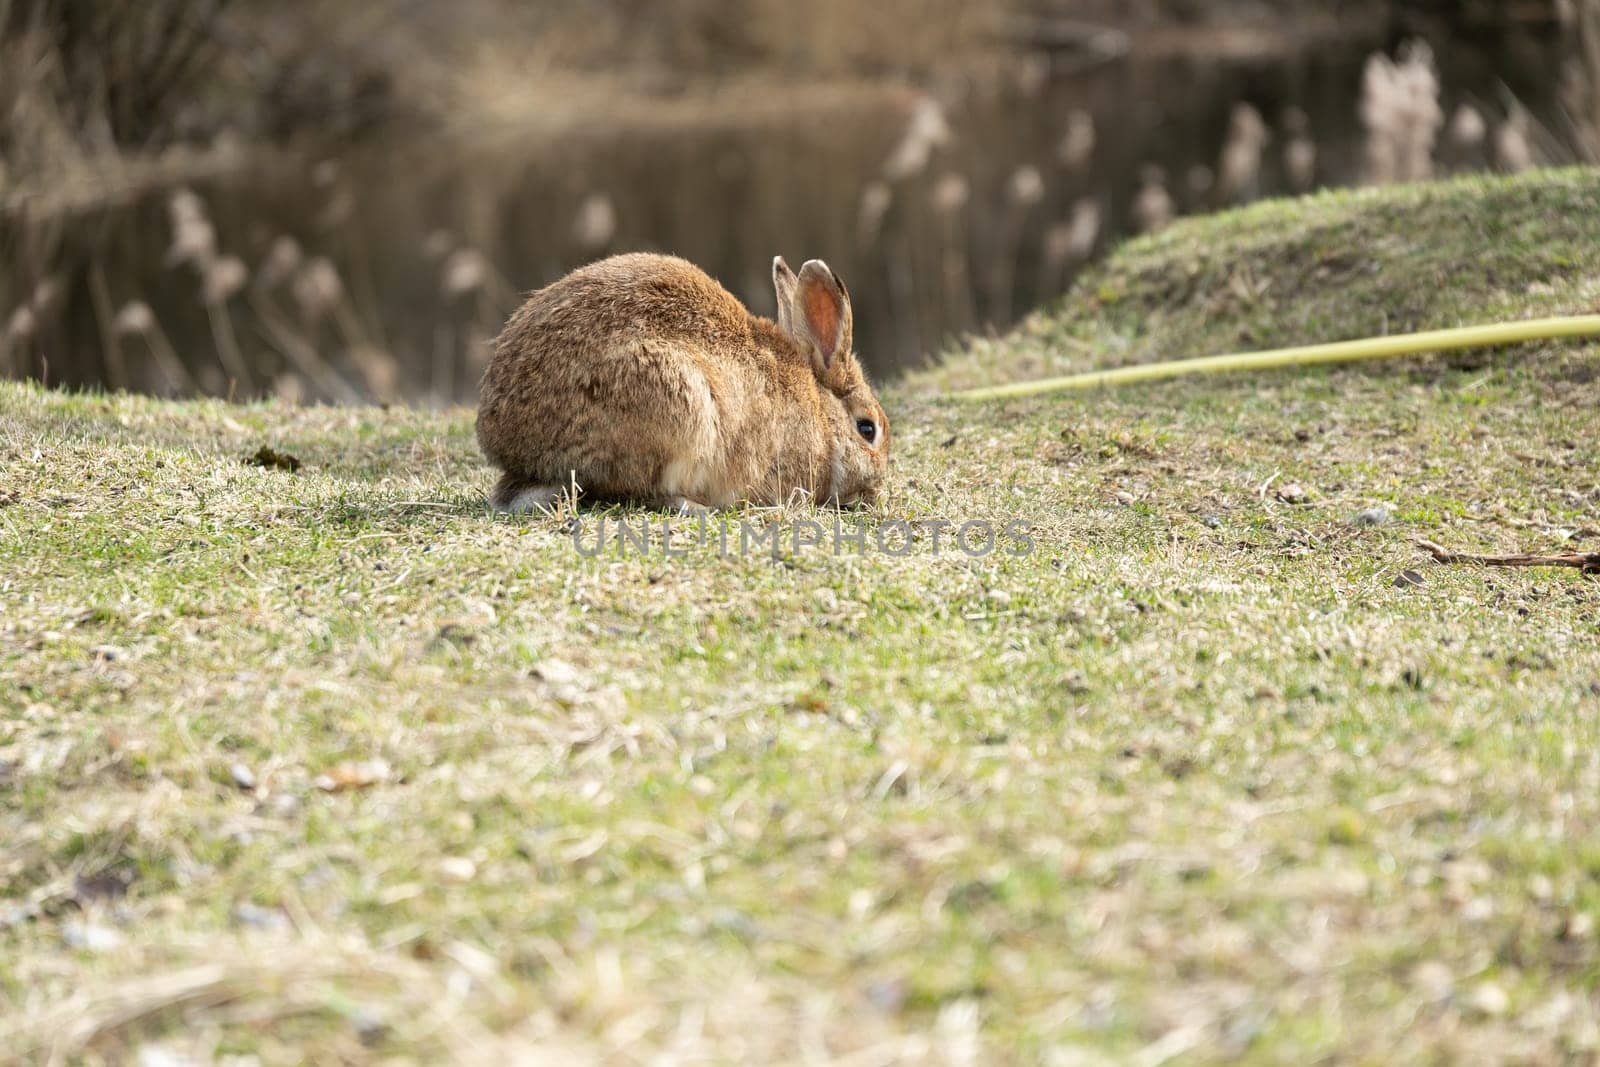 Rabbit Sitting in Grass by Water by TRMK